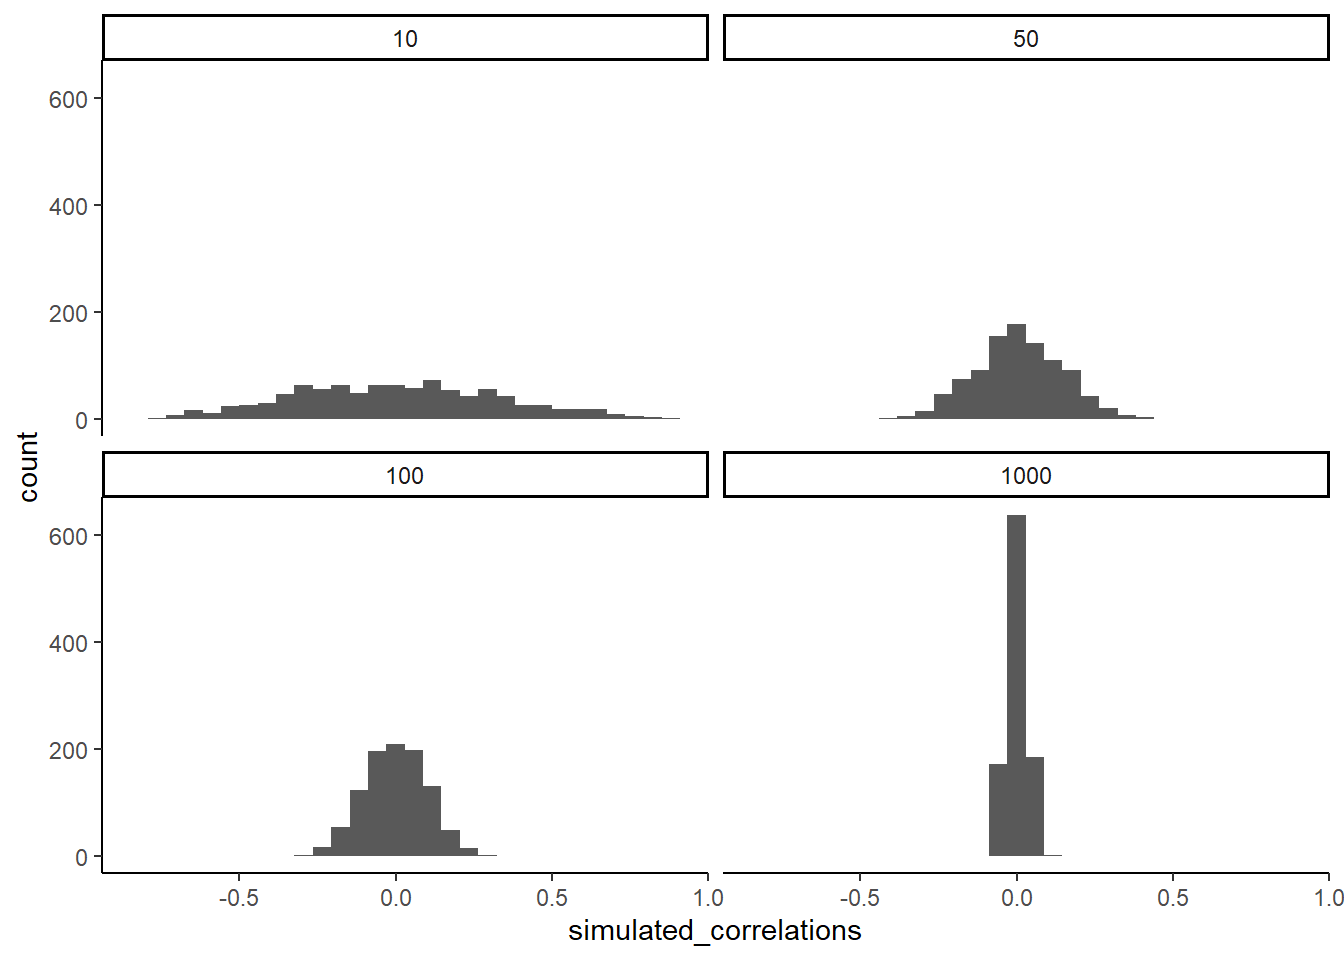 Four histograms showing the frequency distributions of r-values between completely random X and Y variables as a function of sample-size. The width of the distributions shrink as sample-size increases. Smaller sample-sizes are more likely to produce a wider range of r-values by chance. Larger sample-sizes always produce a narrow range of small r-values